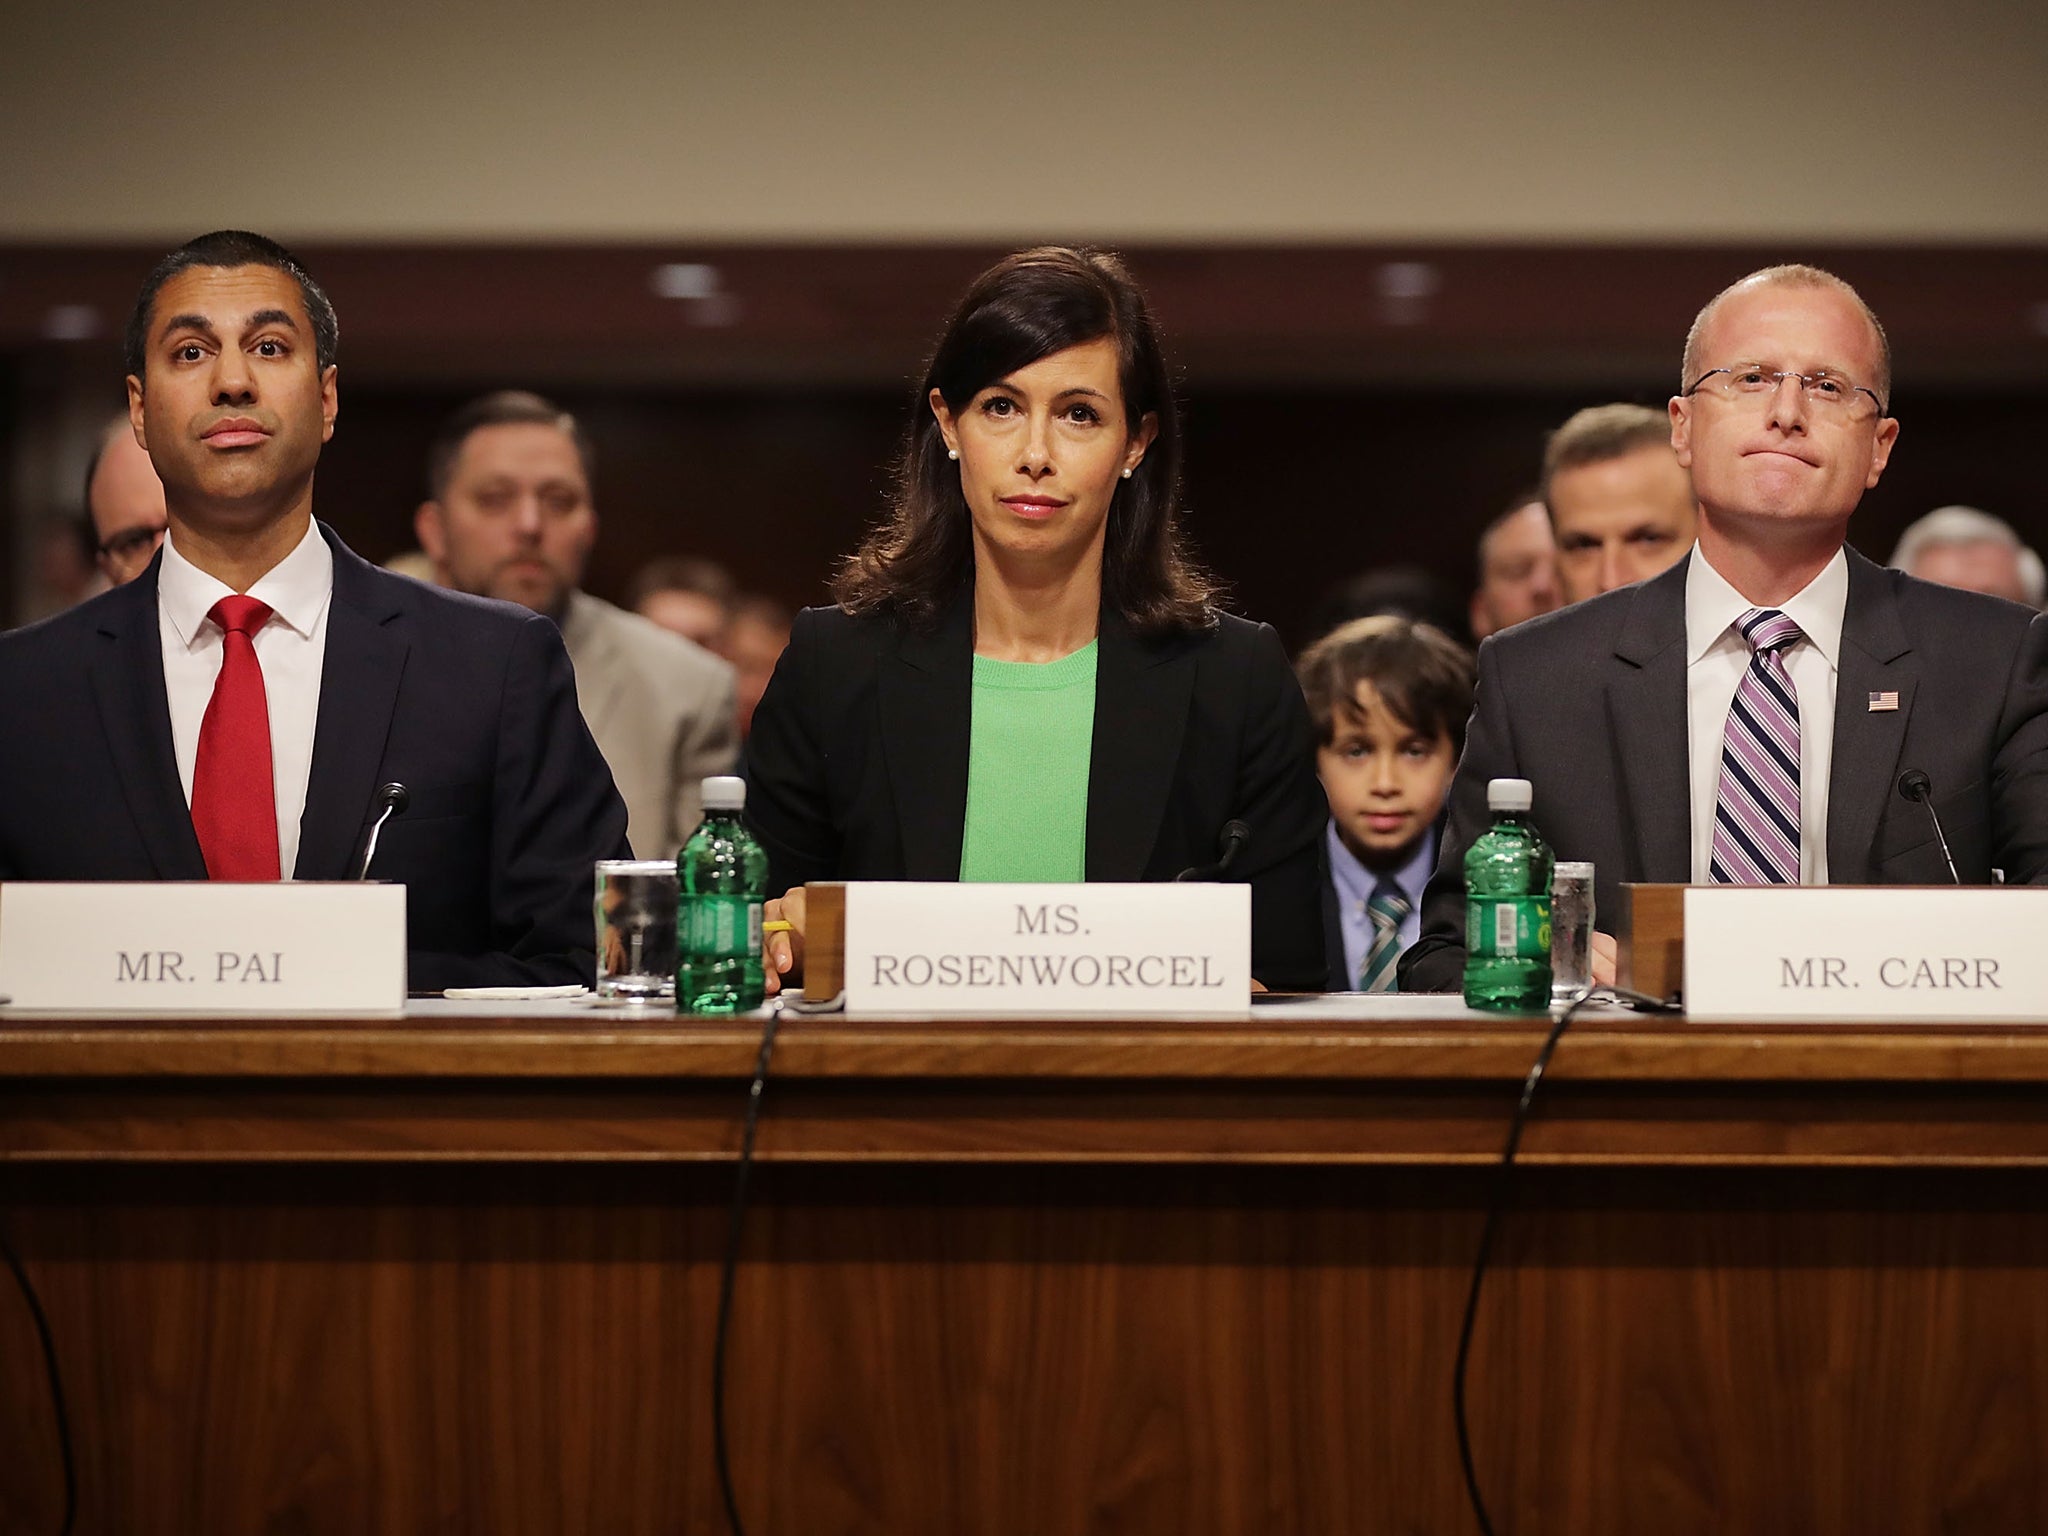 Jessica Rosenworcel knows what it is like to be judged for being a working mother